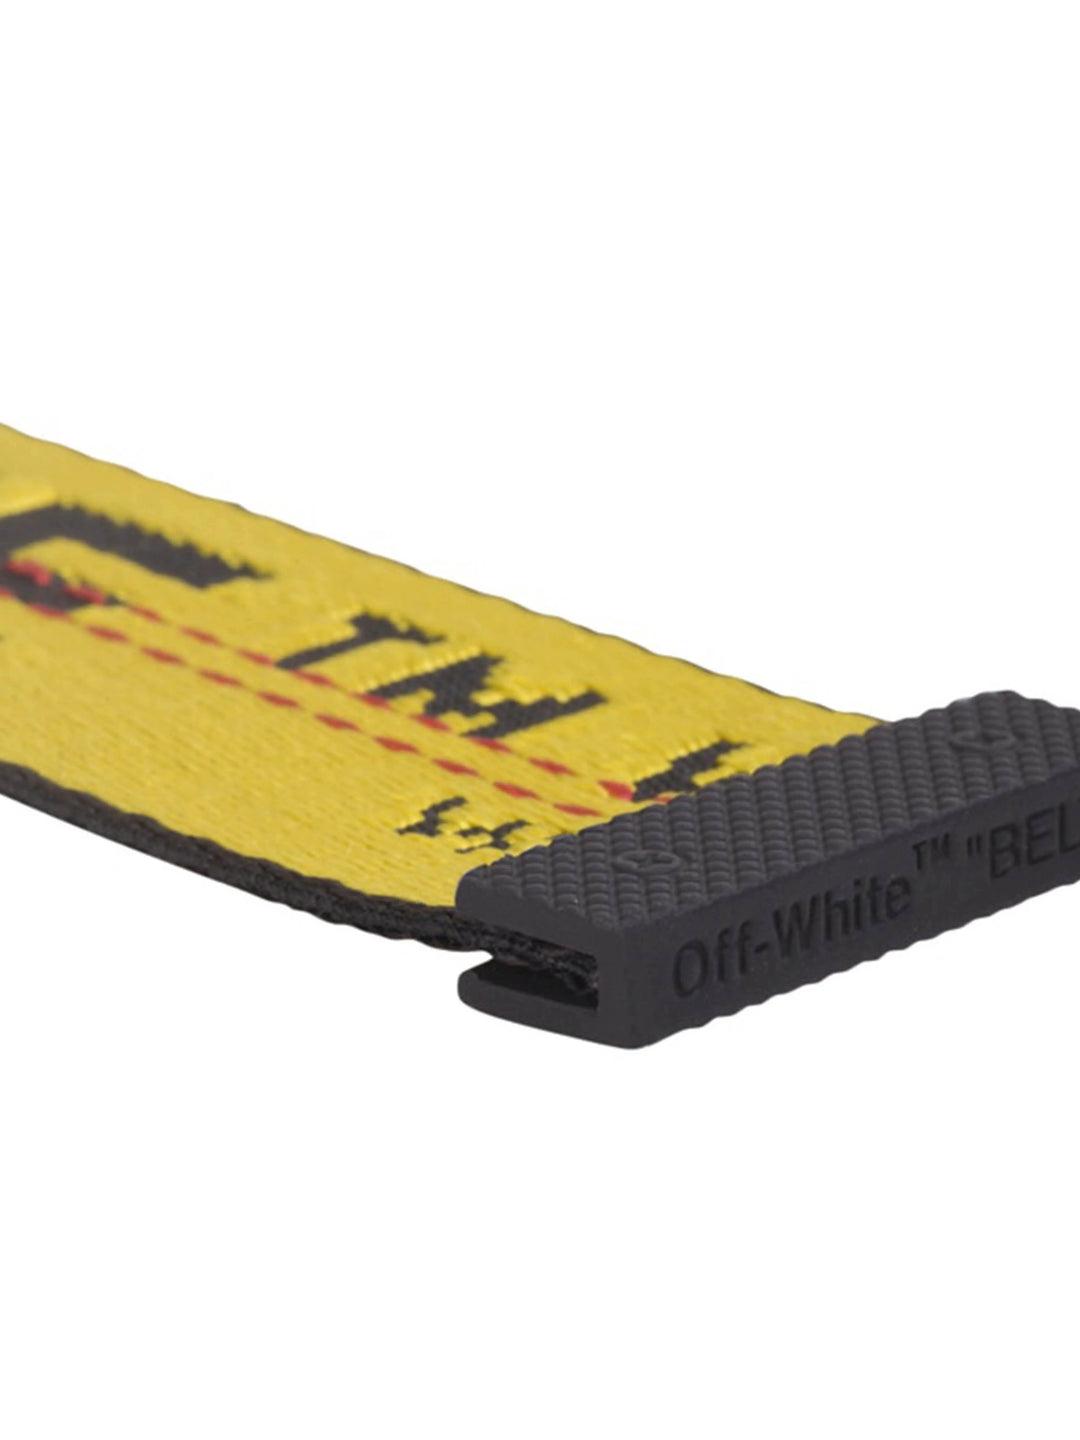 Off-White 2.0 Industrial Belt Yellow/Black [SS19] Prior